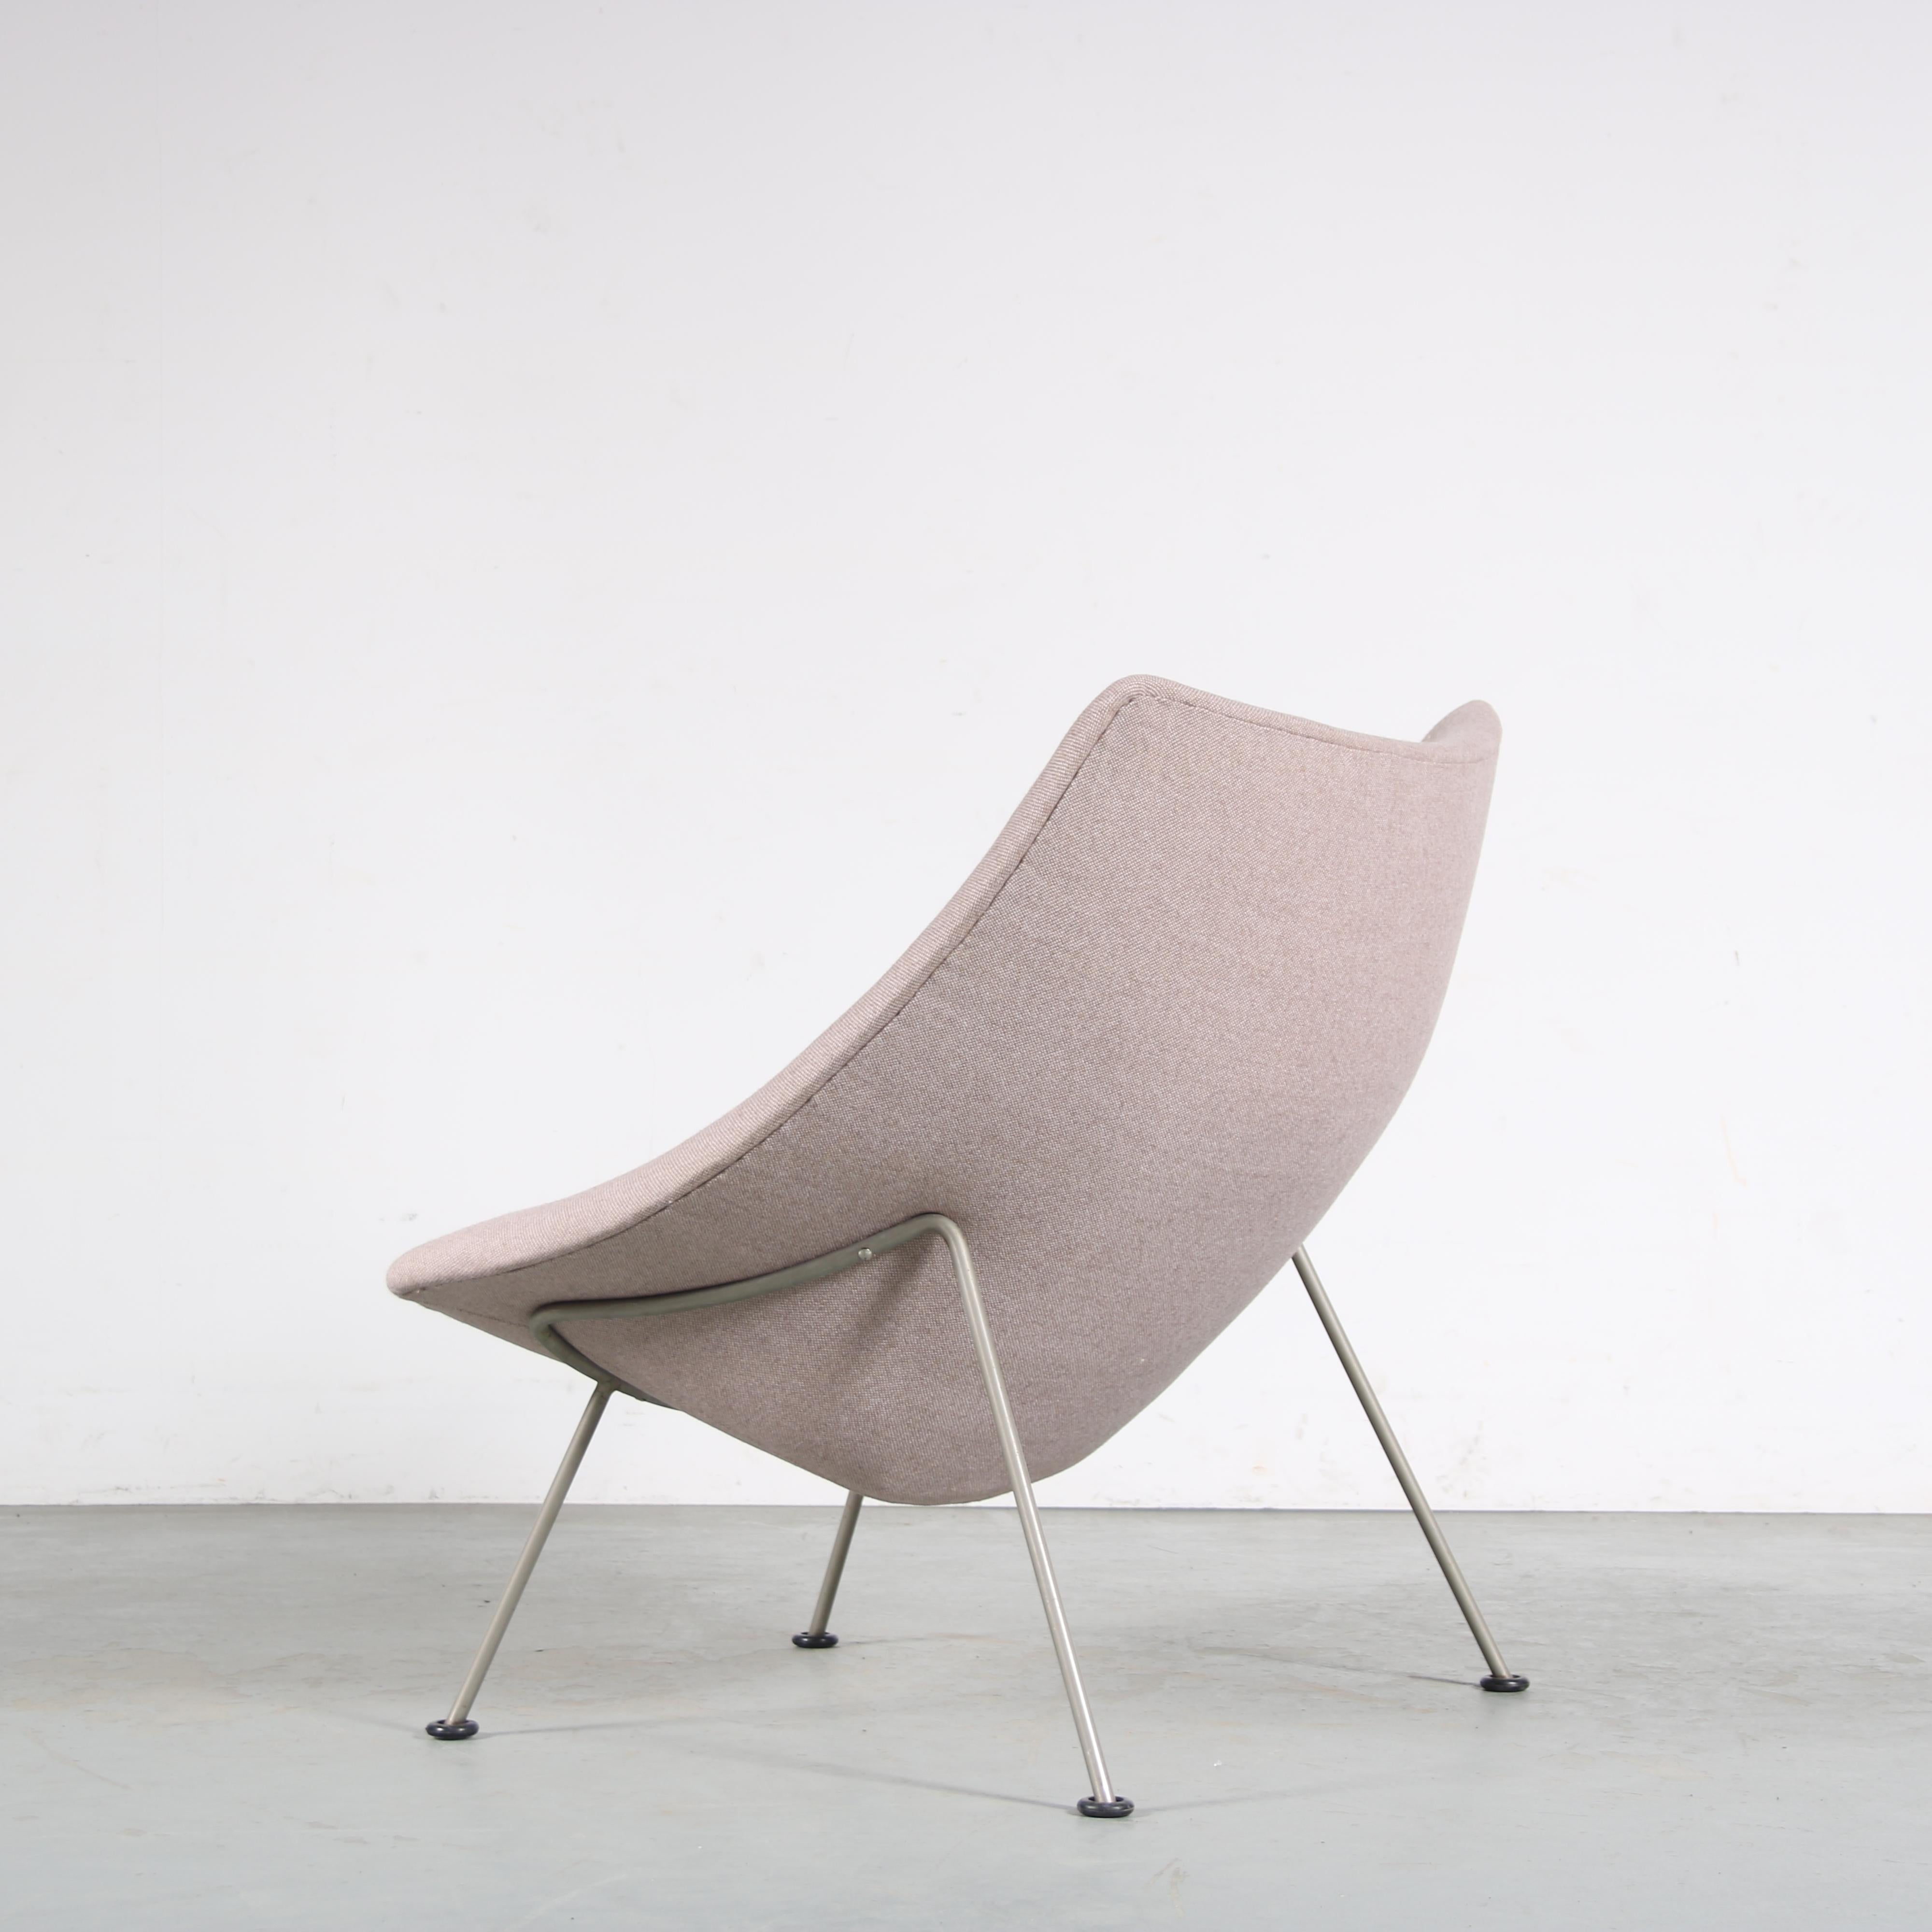 Mid-20th Century Pierre Paulin “Oyster” Chair and Ottoman for Artifort, Netherlands 1950